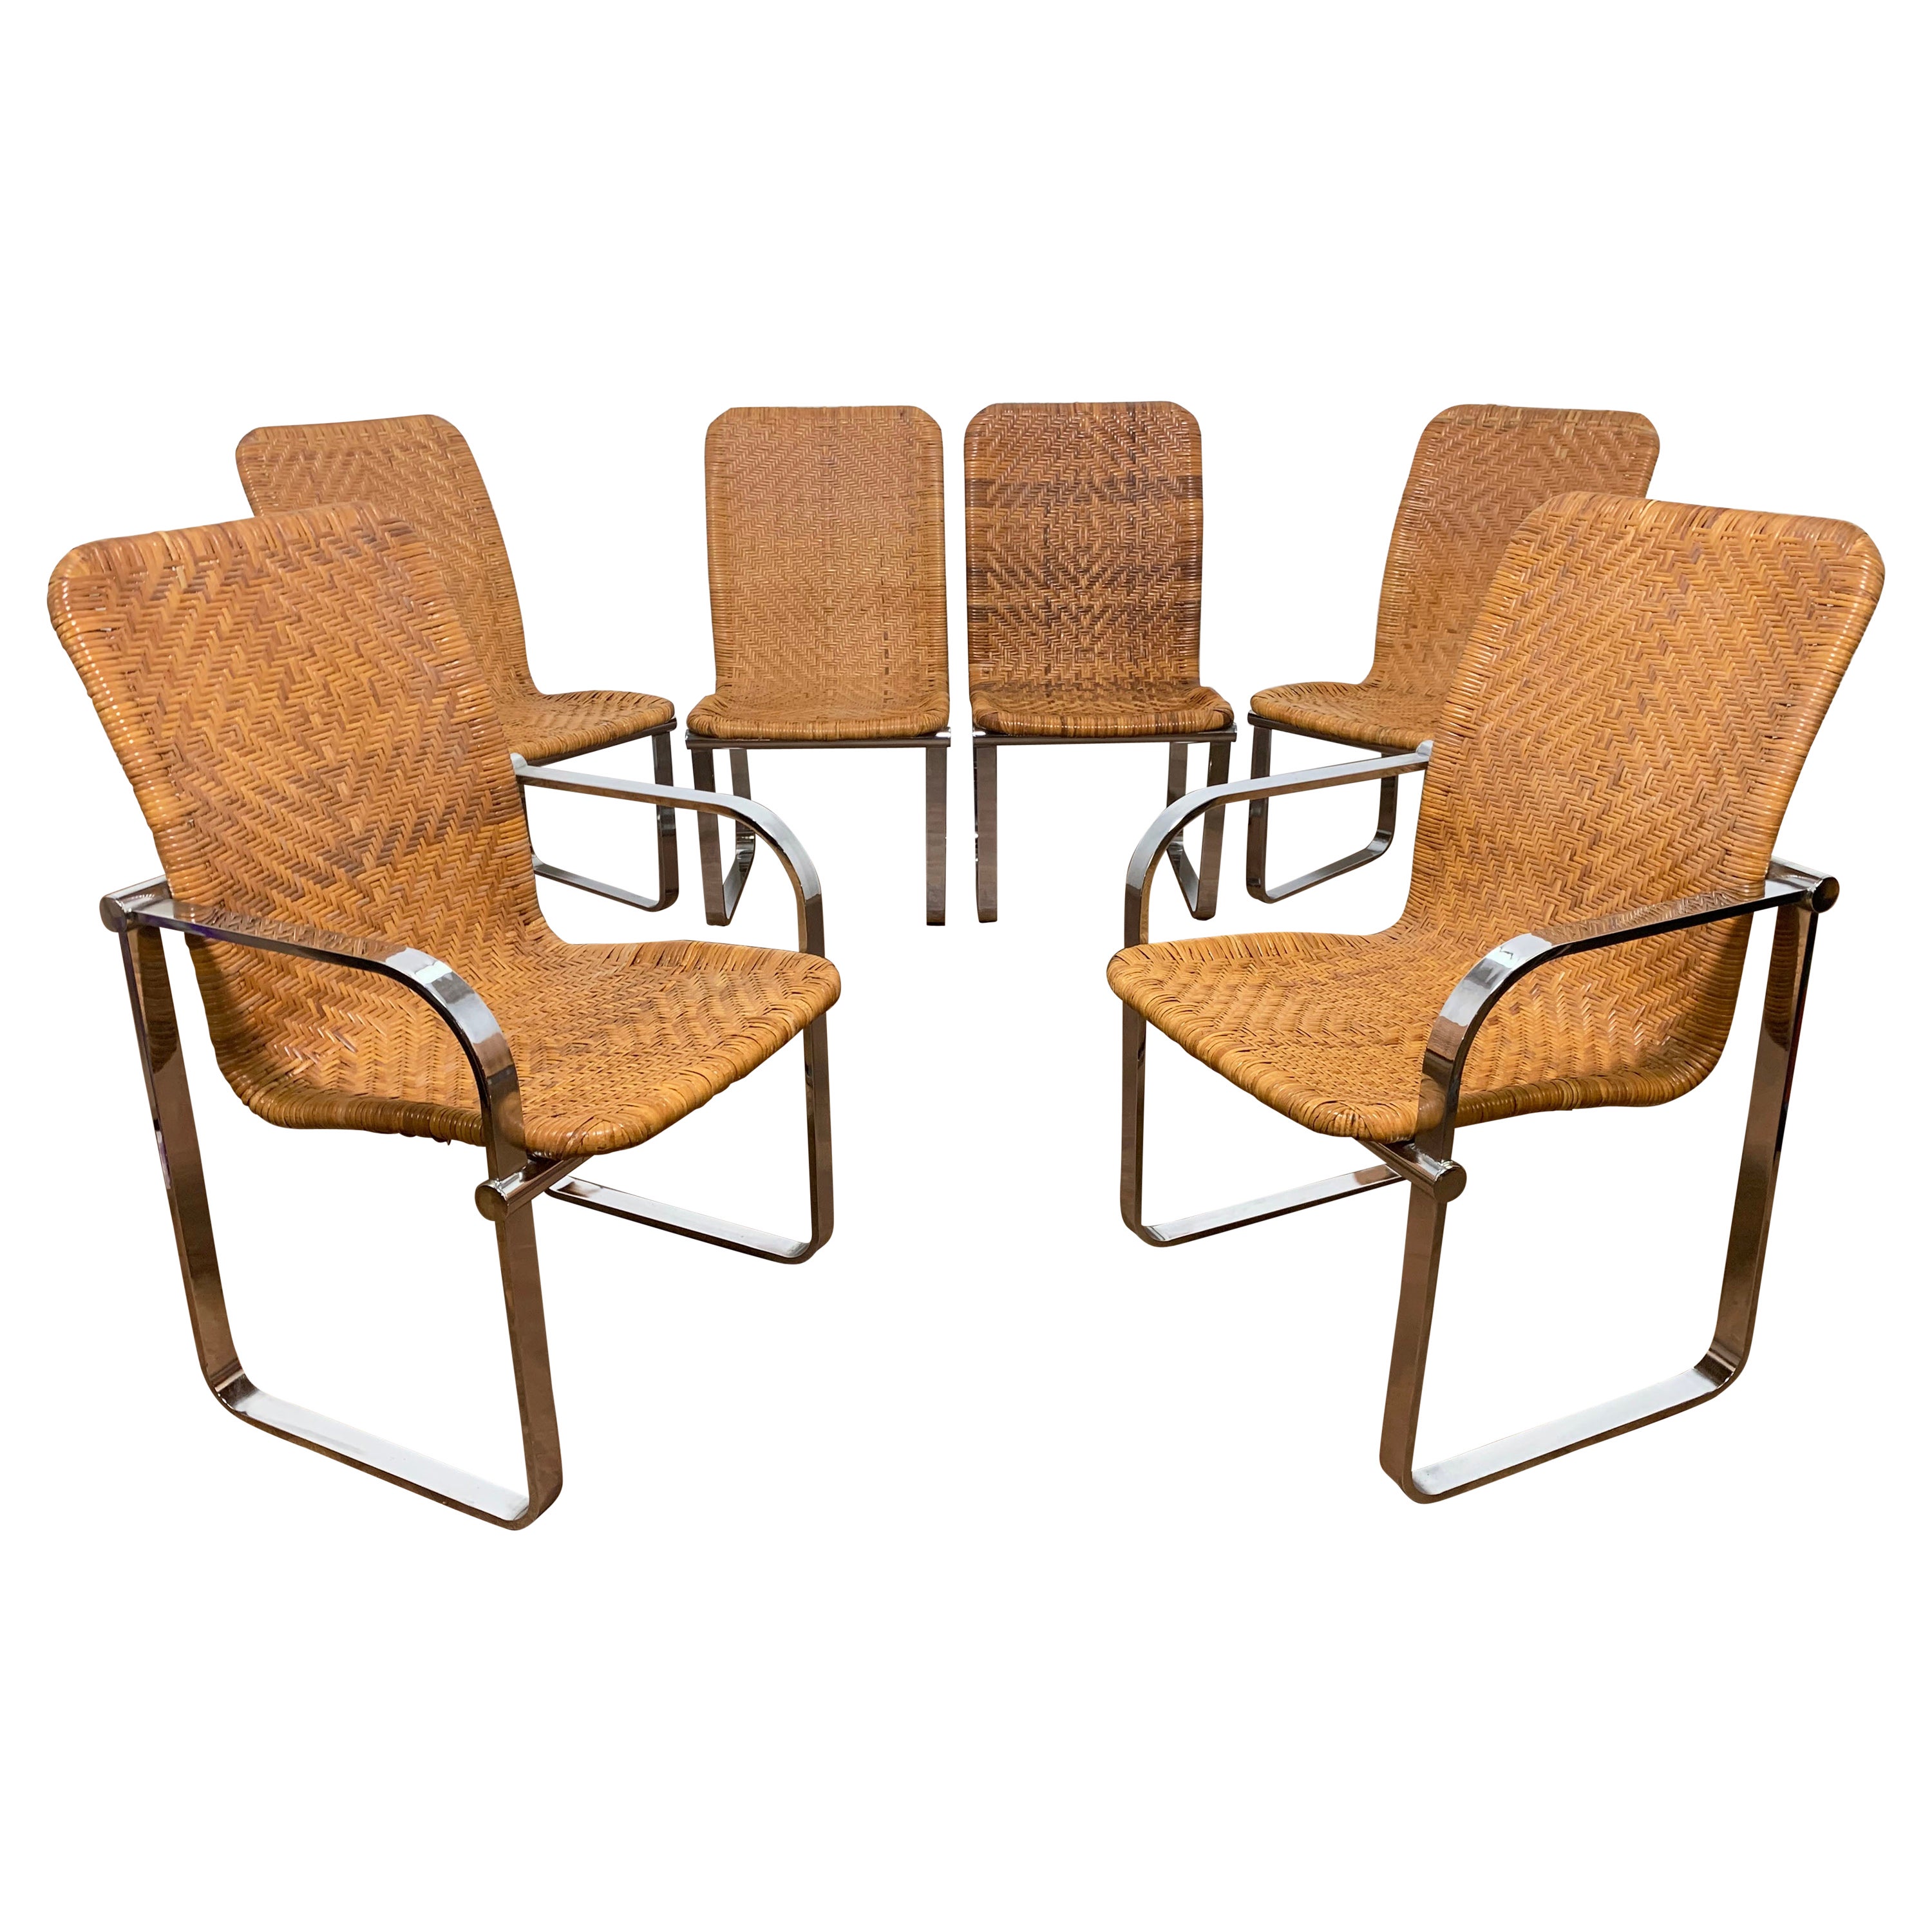 Set of Six Design Institute America Woven Rattan & Chrome Dining Chairs C. 1970s